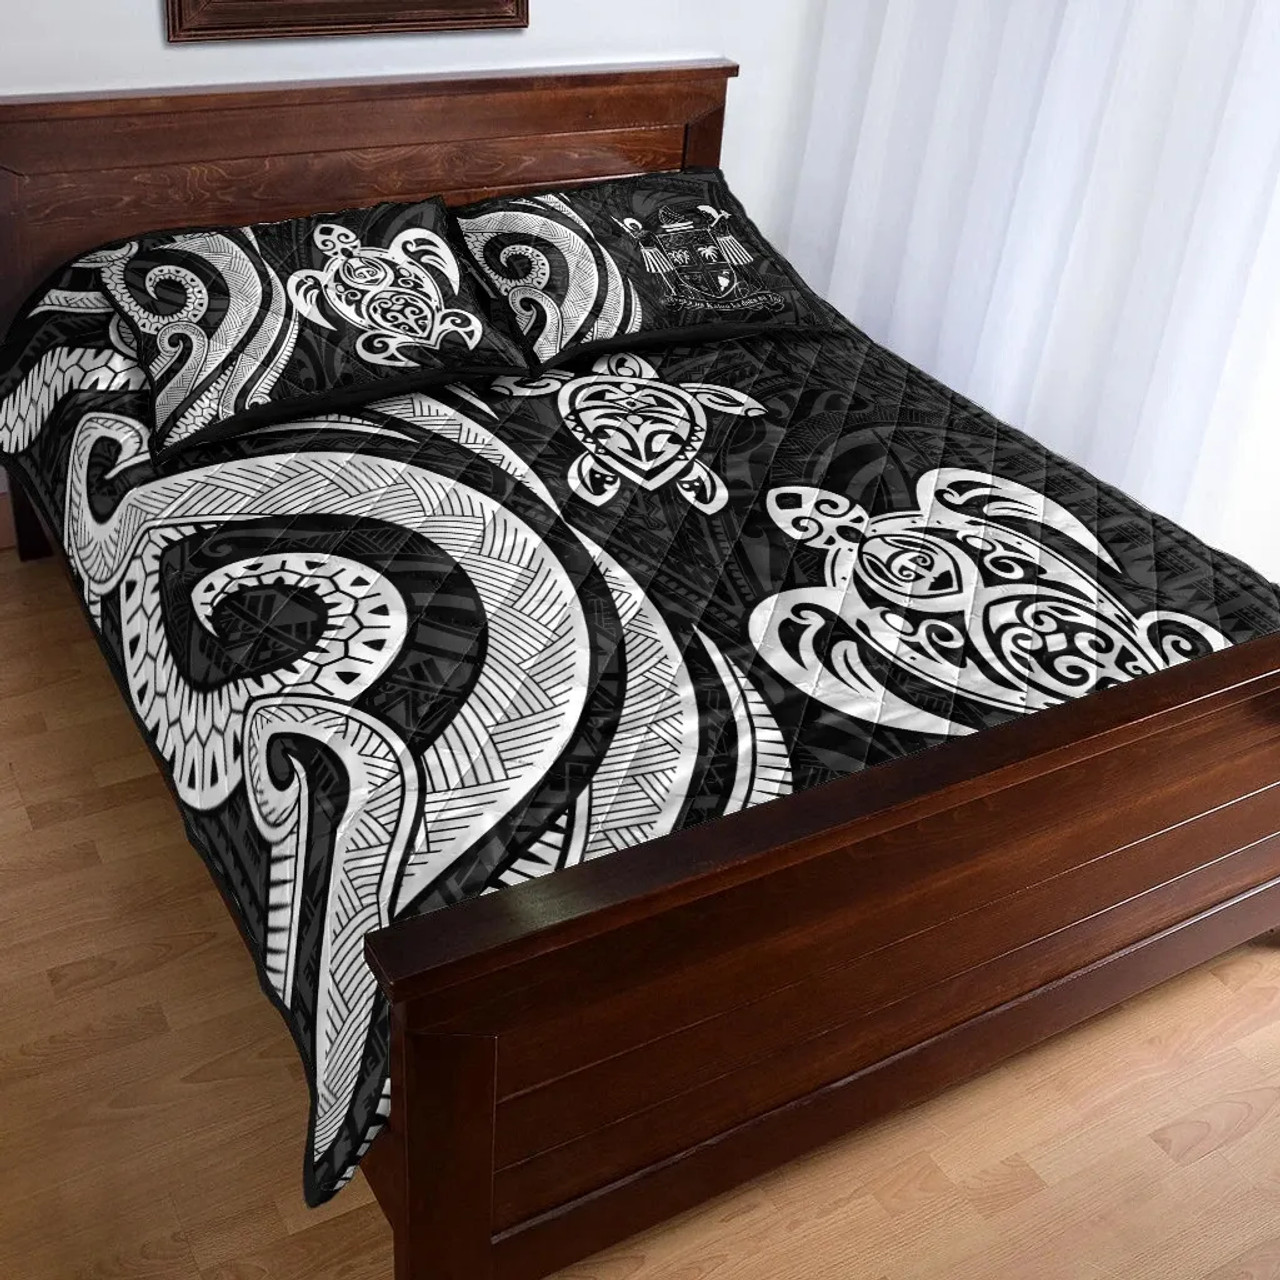 Fiji Quilt Bed Set - White Tentacle Turtle Crest 3